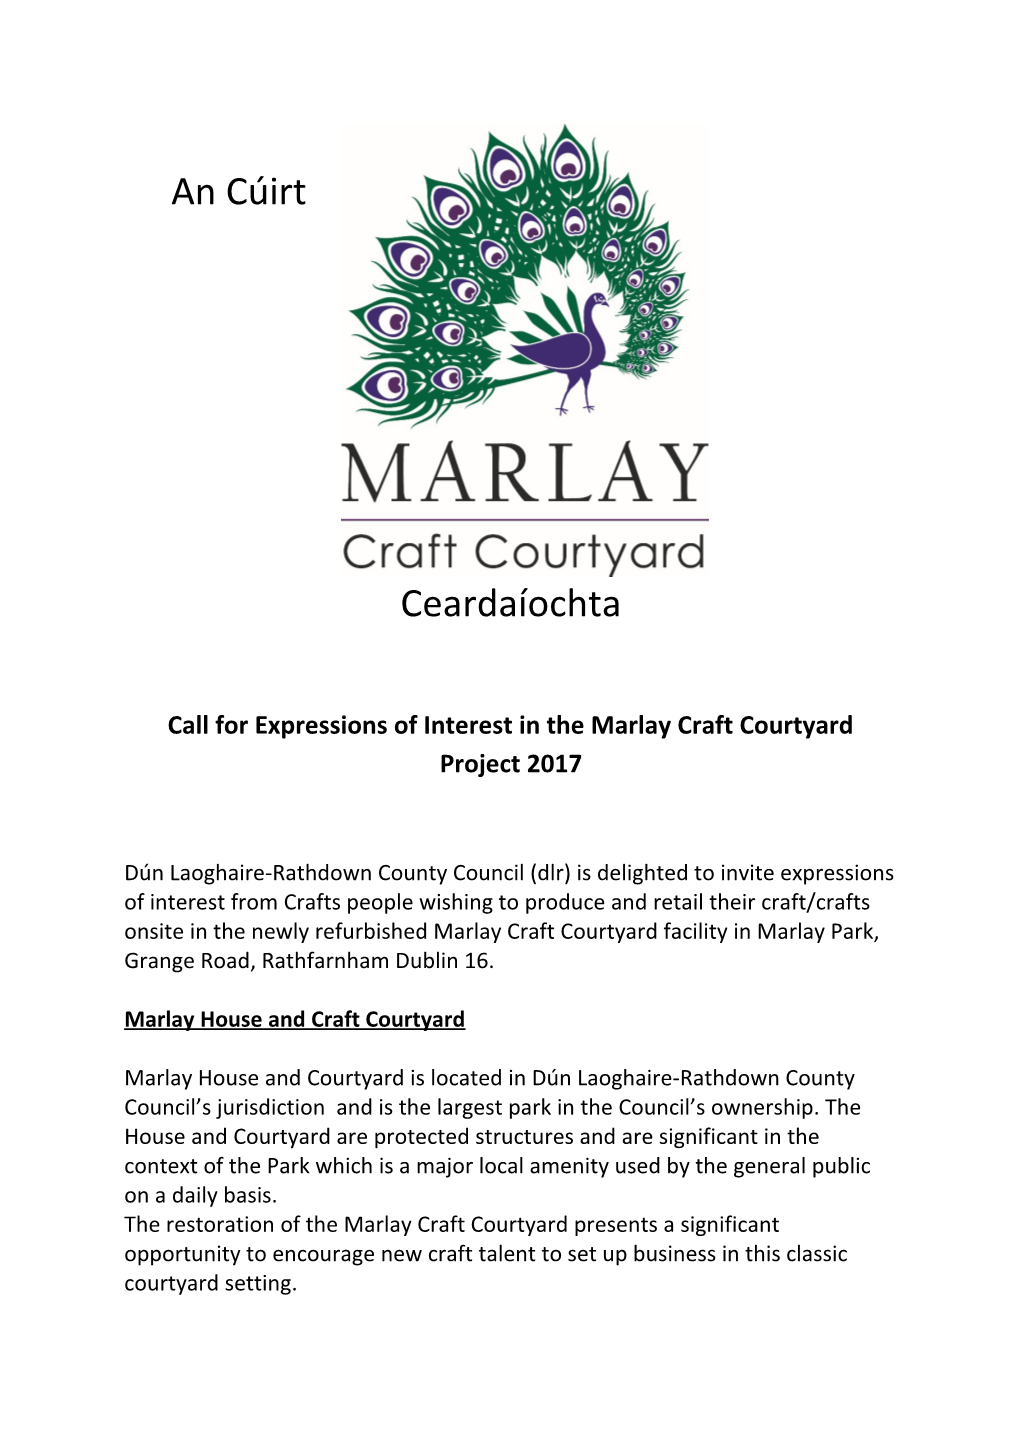 Call for Expressions of Interest in the Marlay Craft Courtyard Project 2017